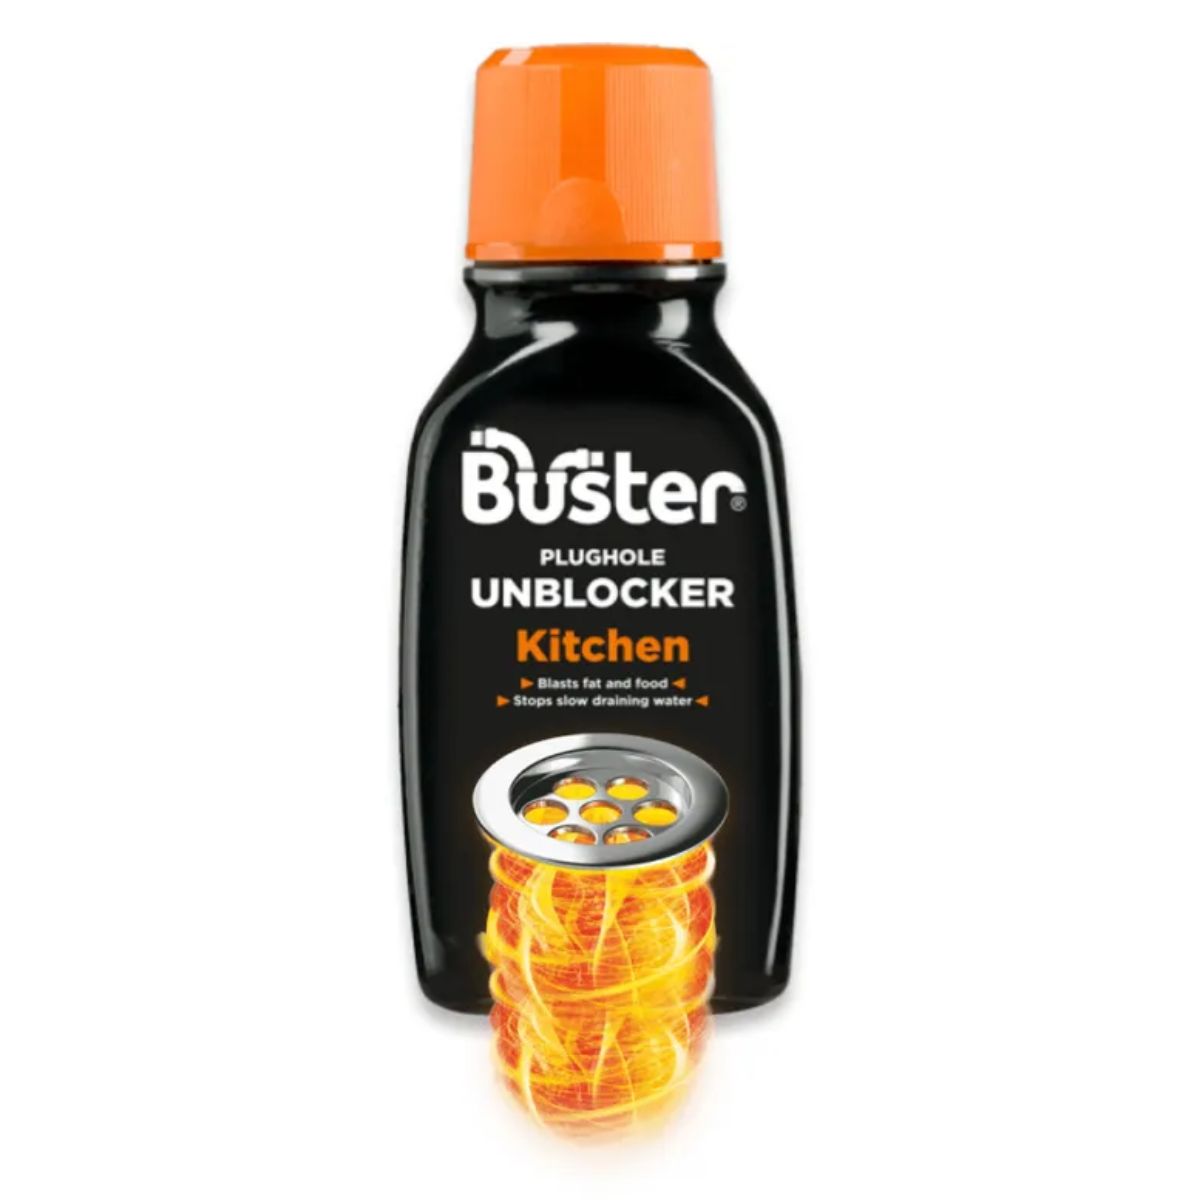 A bottle of Buster - Kitchen Unblocker - 200ml for the kitchen with an illustrated representation of its action on clogs.